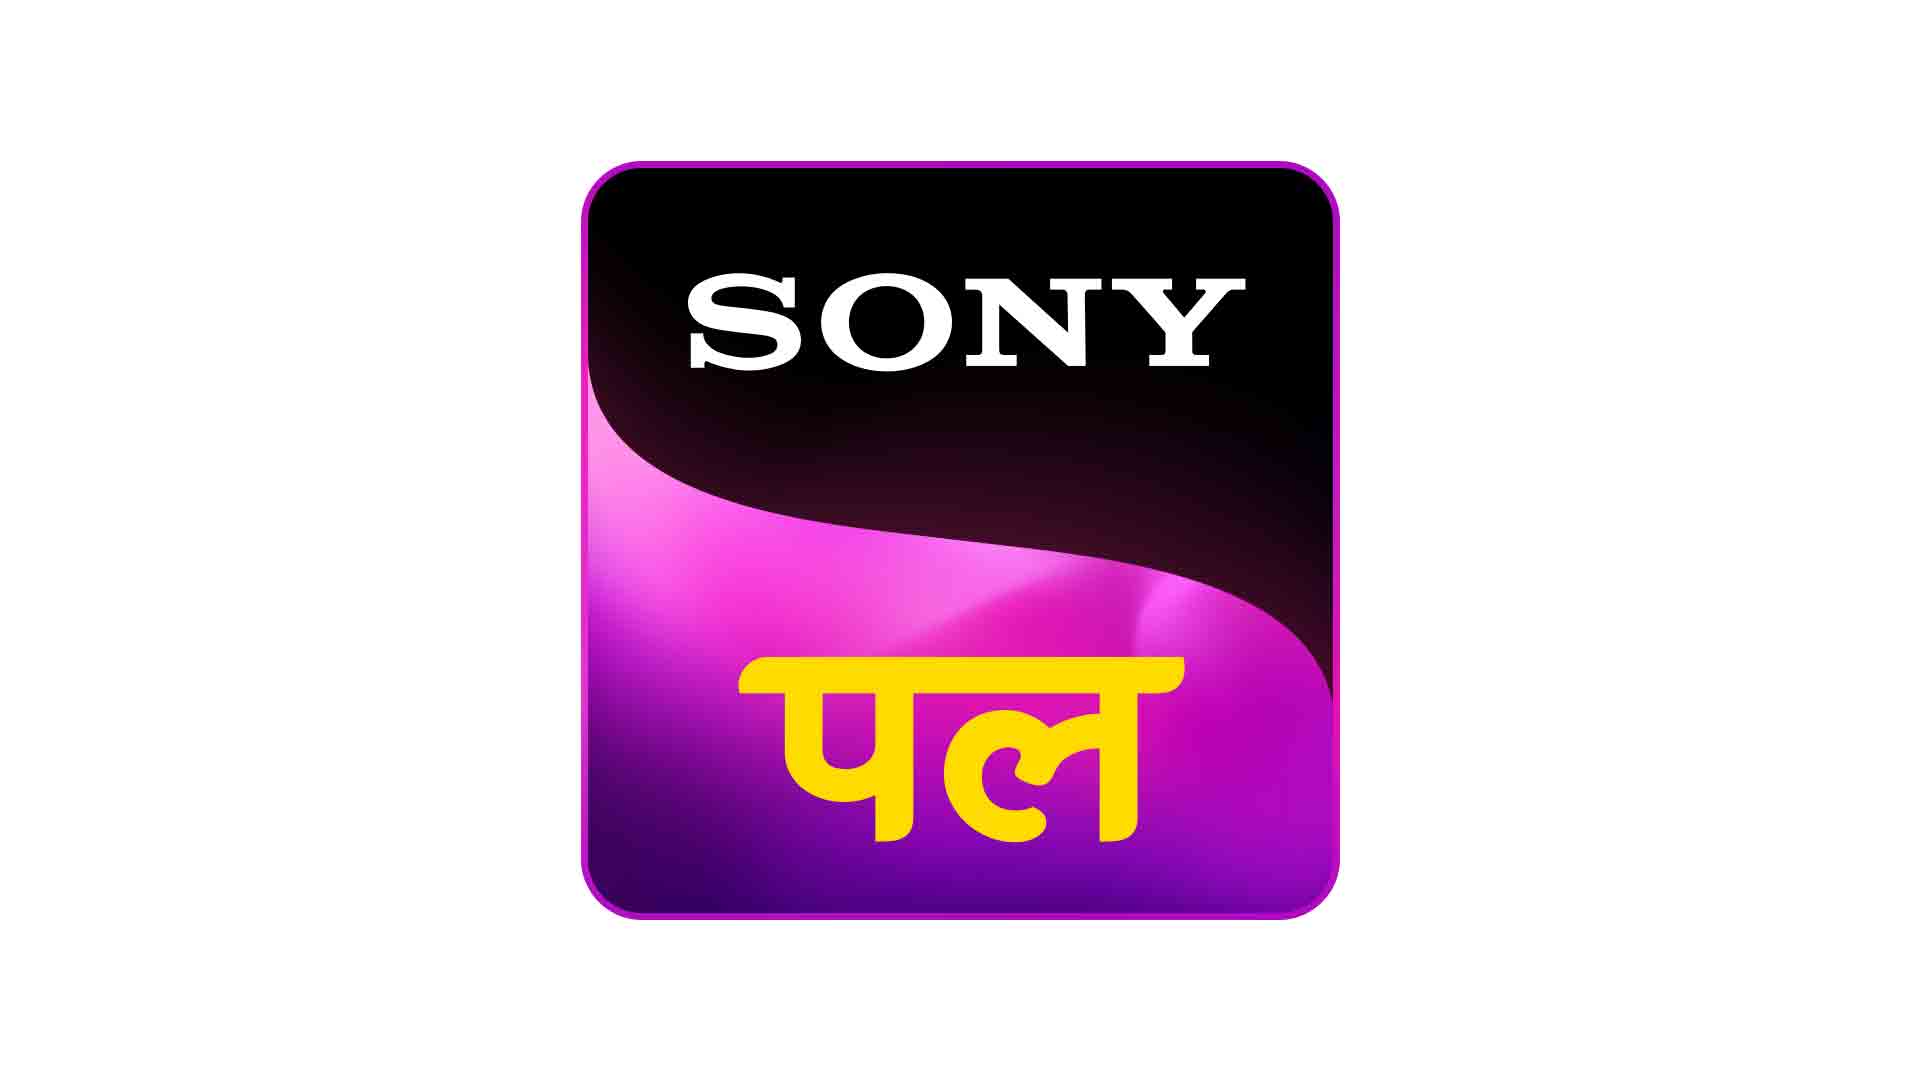 Sony Tv Hd Logo Sony Entertainment Television Logo - Rishtey Tv, HD Png  Download - 1550x800(#506154) - PngFind